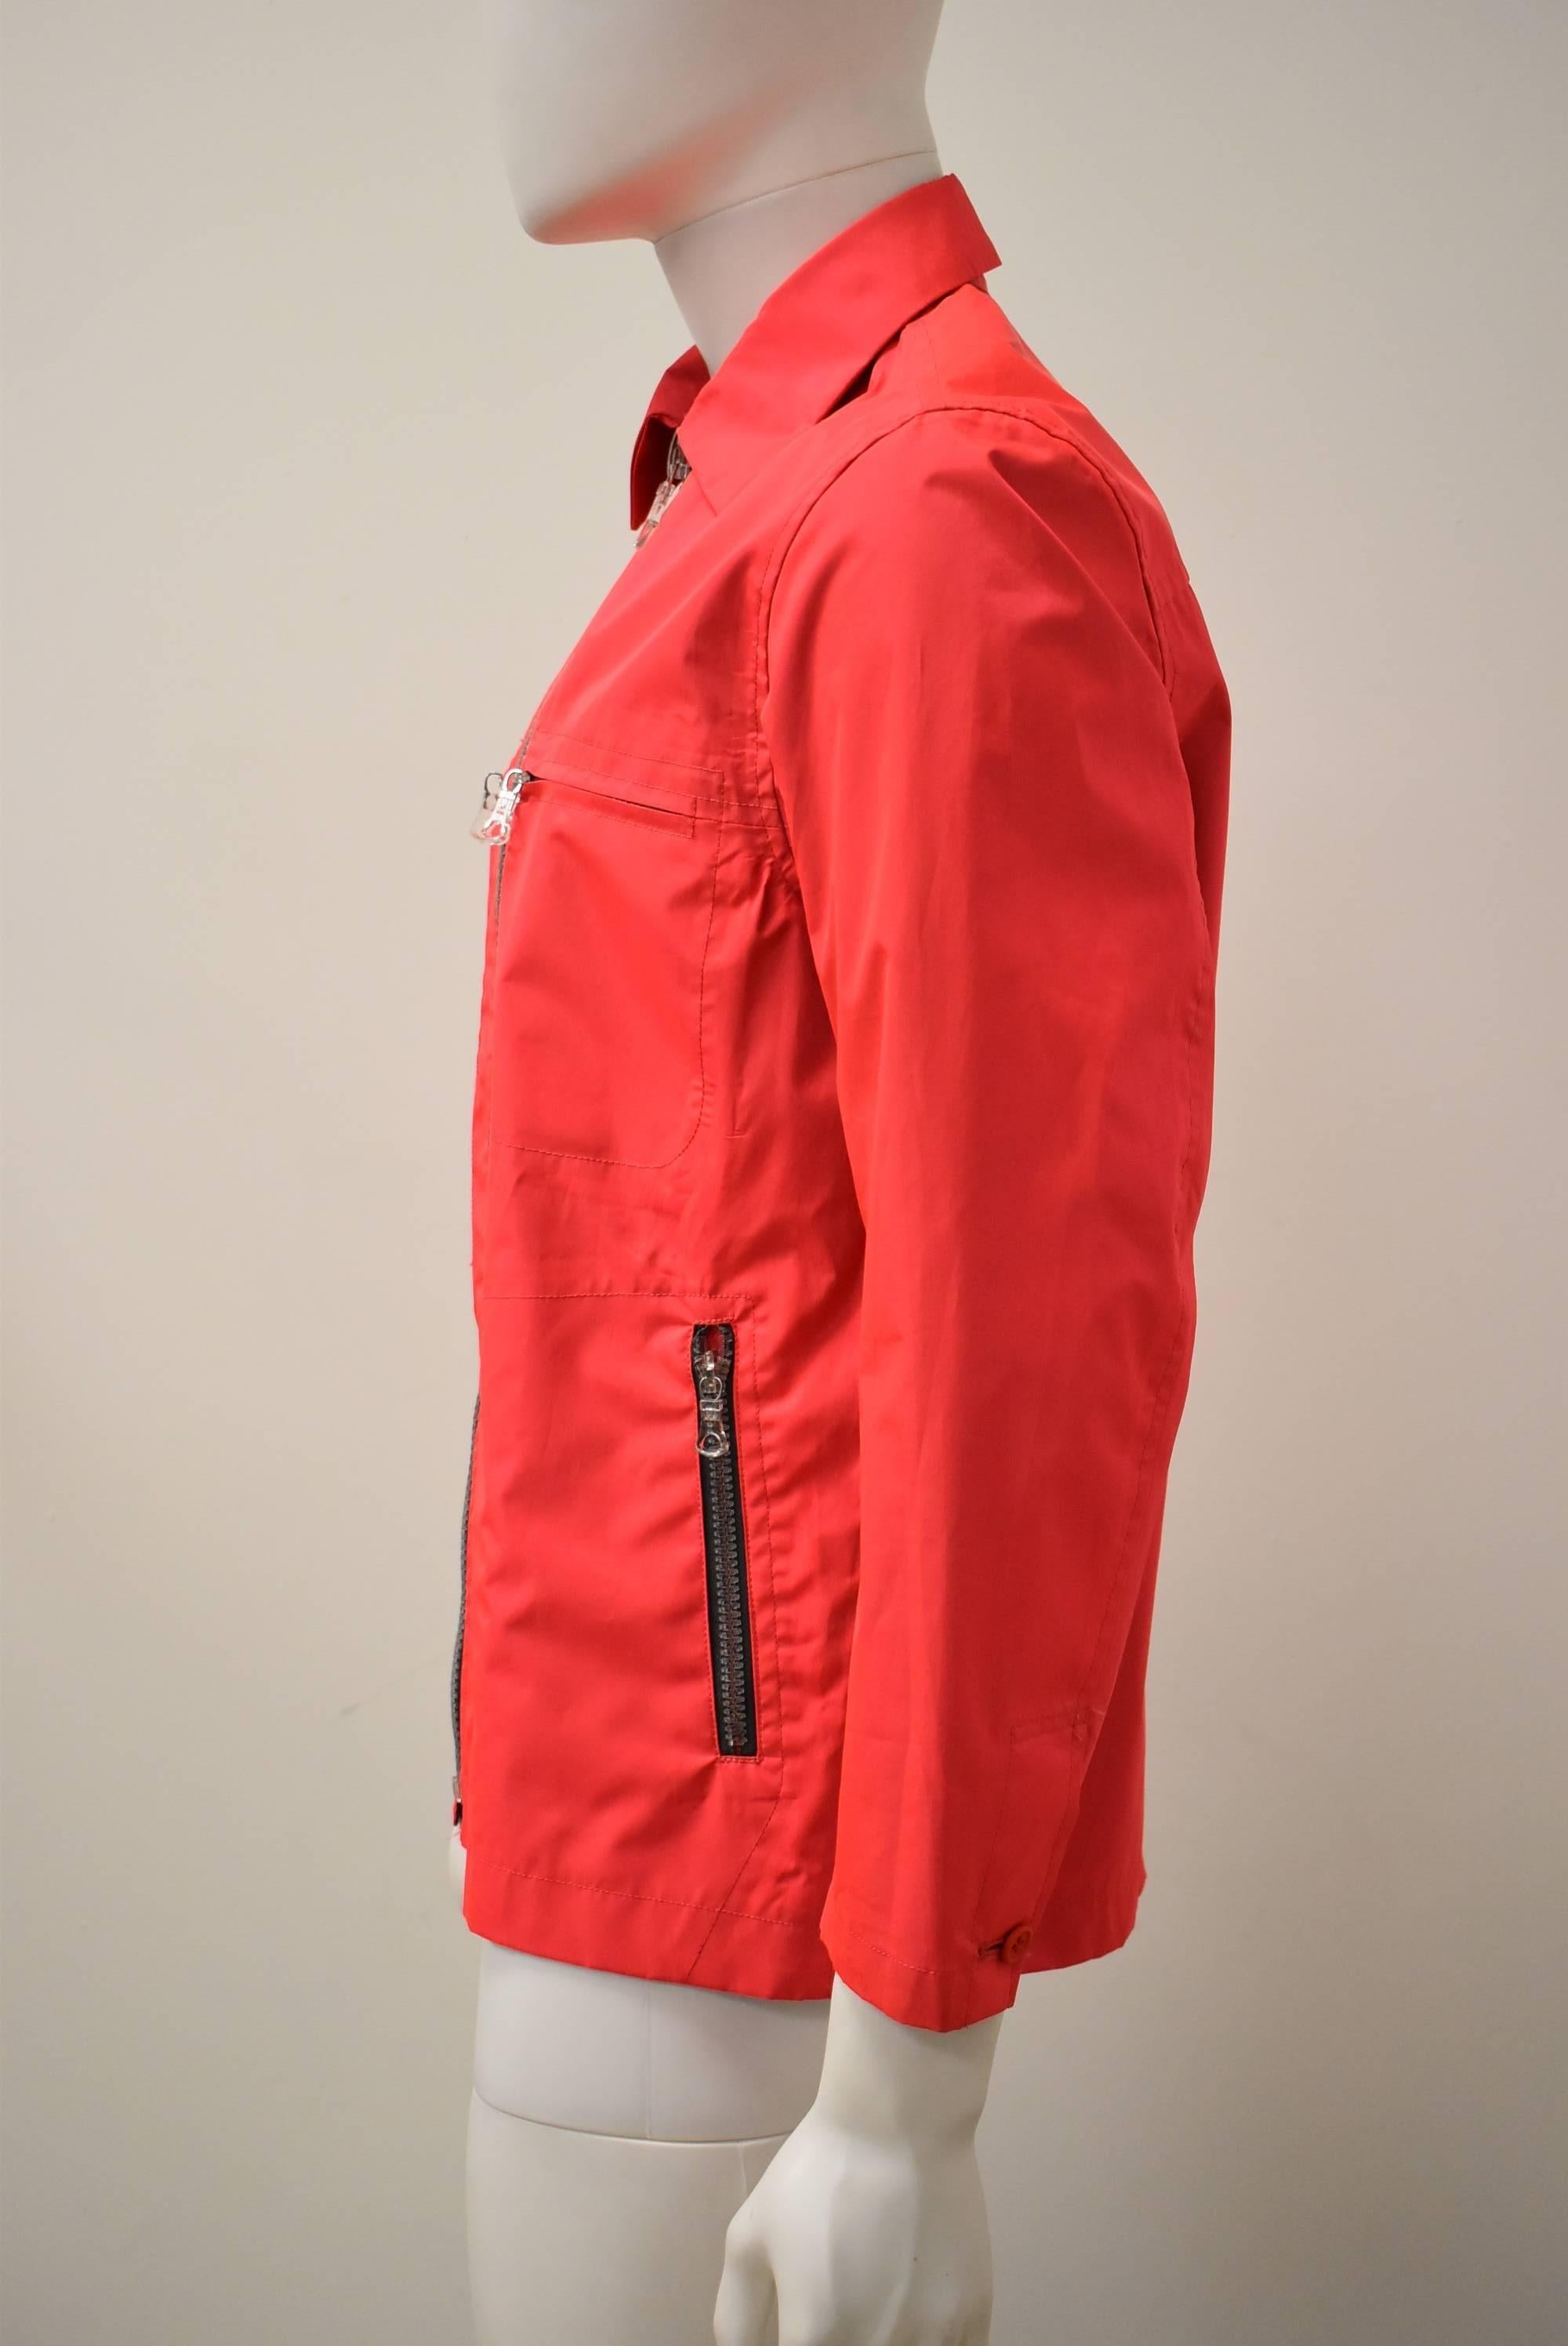 A bright neon red lightweight sports jacket from Issey Miyake’s mainline collection. The jacket has a simple, straight, short shape, falling to just below the waist. There is an oversize clear zip-fastening detail on the front. There are also two